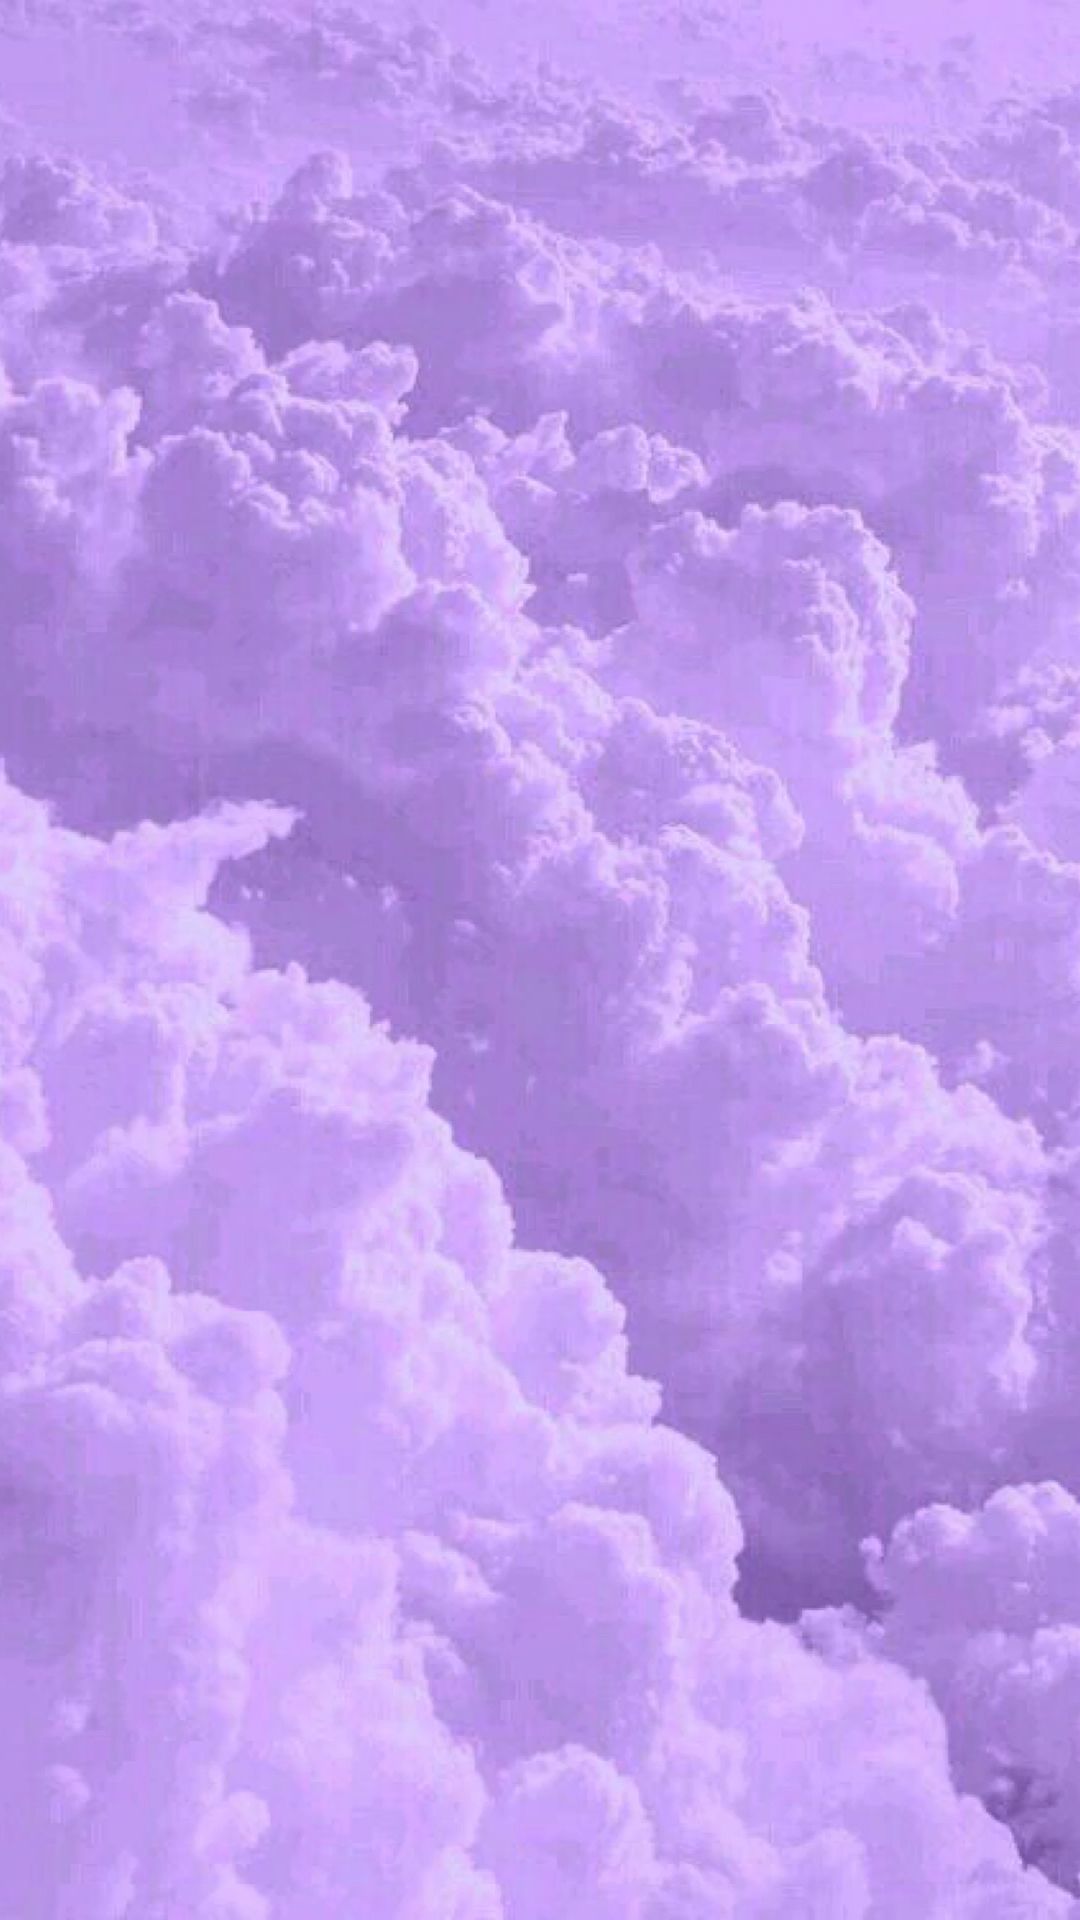 purple and aesthetic wallpapers Pinterest